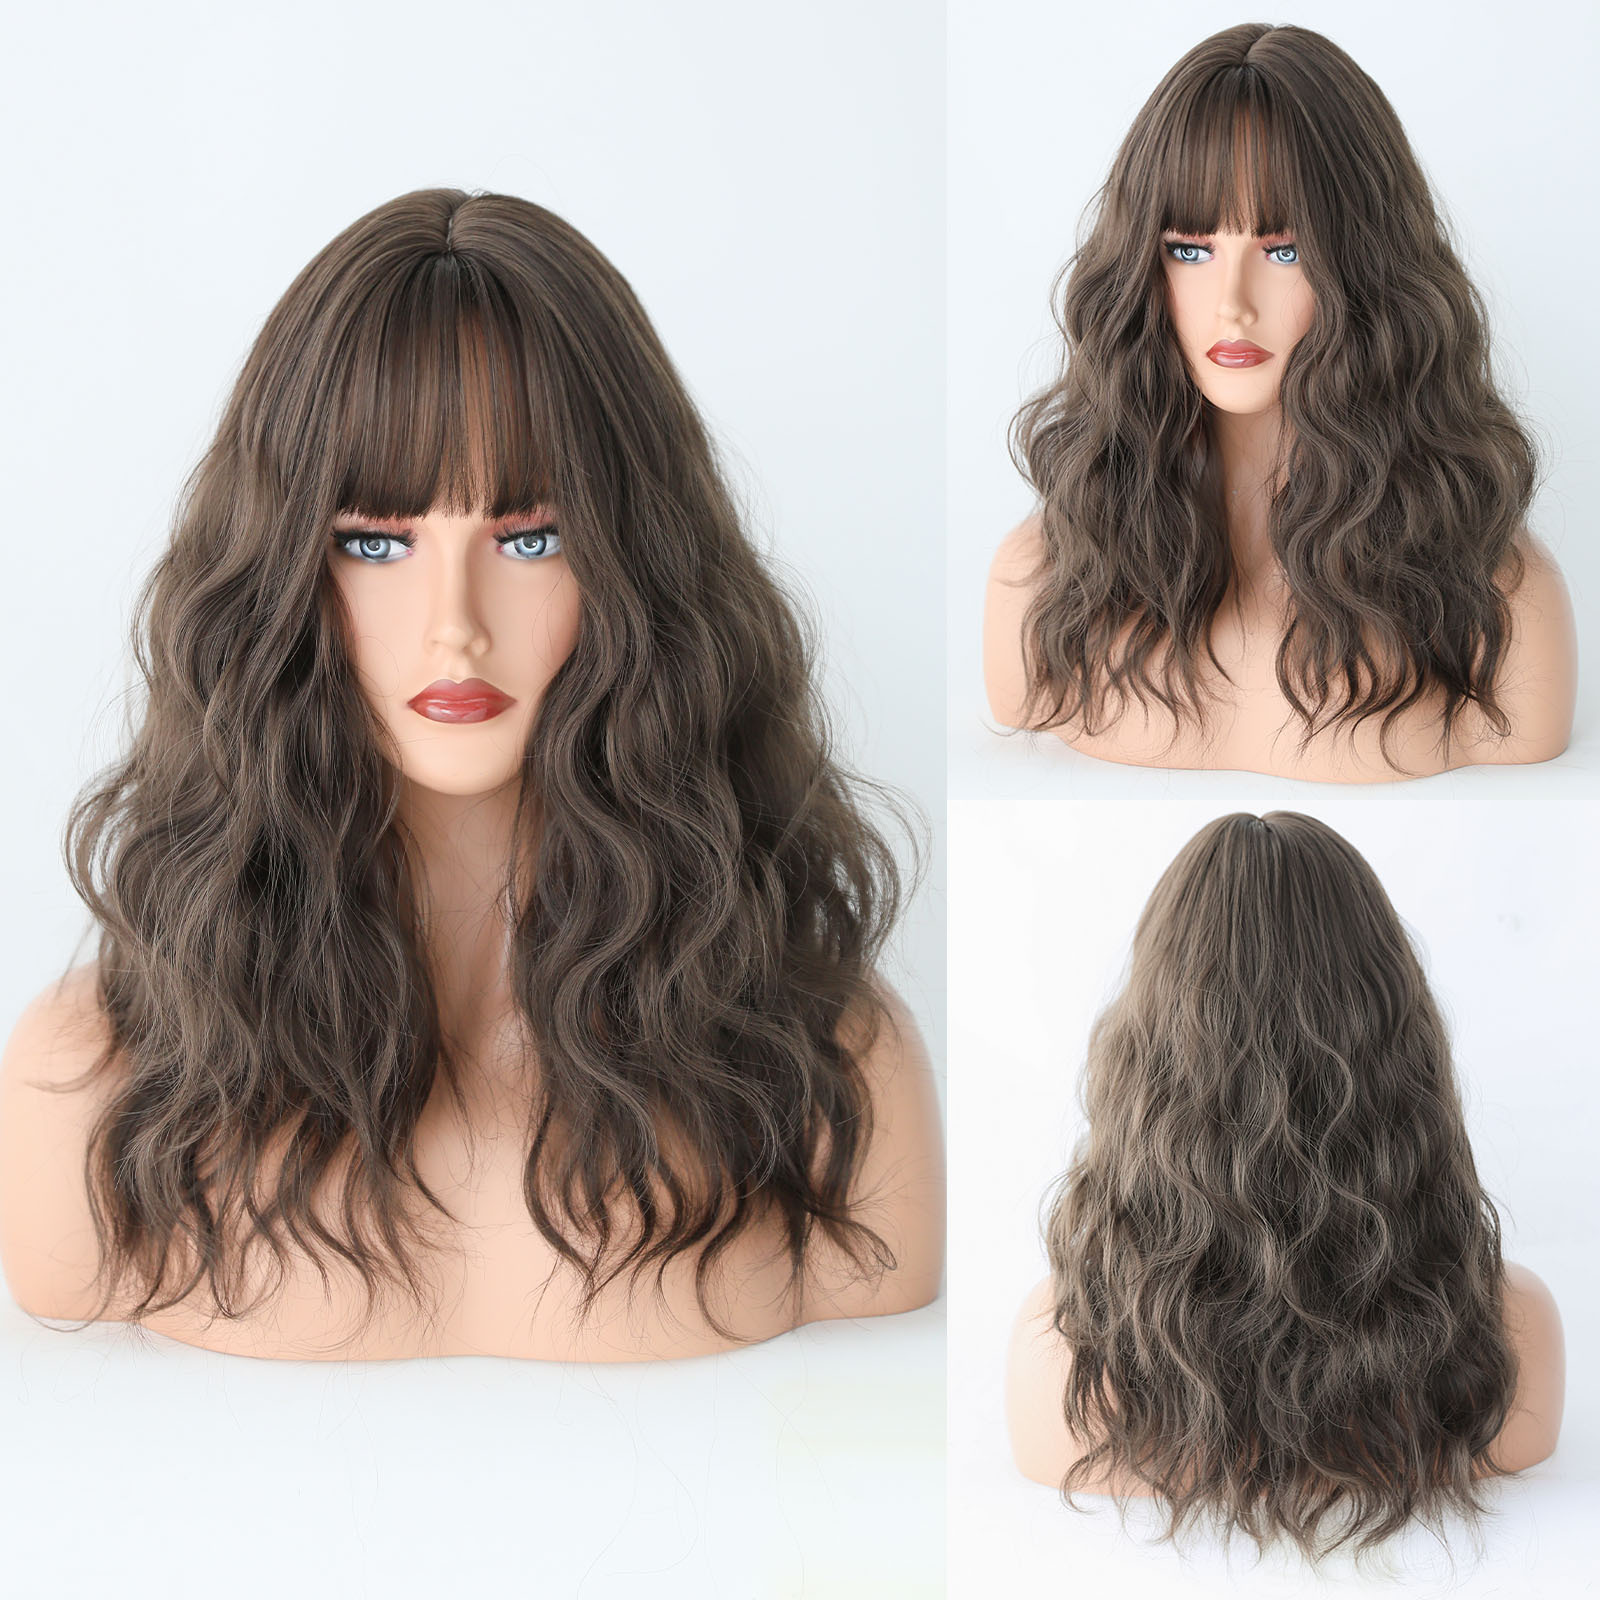 A trendy female haze blue wig with wavy medium-length curls, made from synthetic material for a fashionable appearance